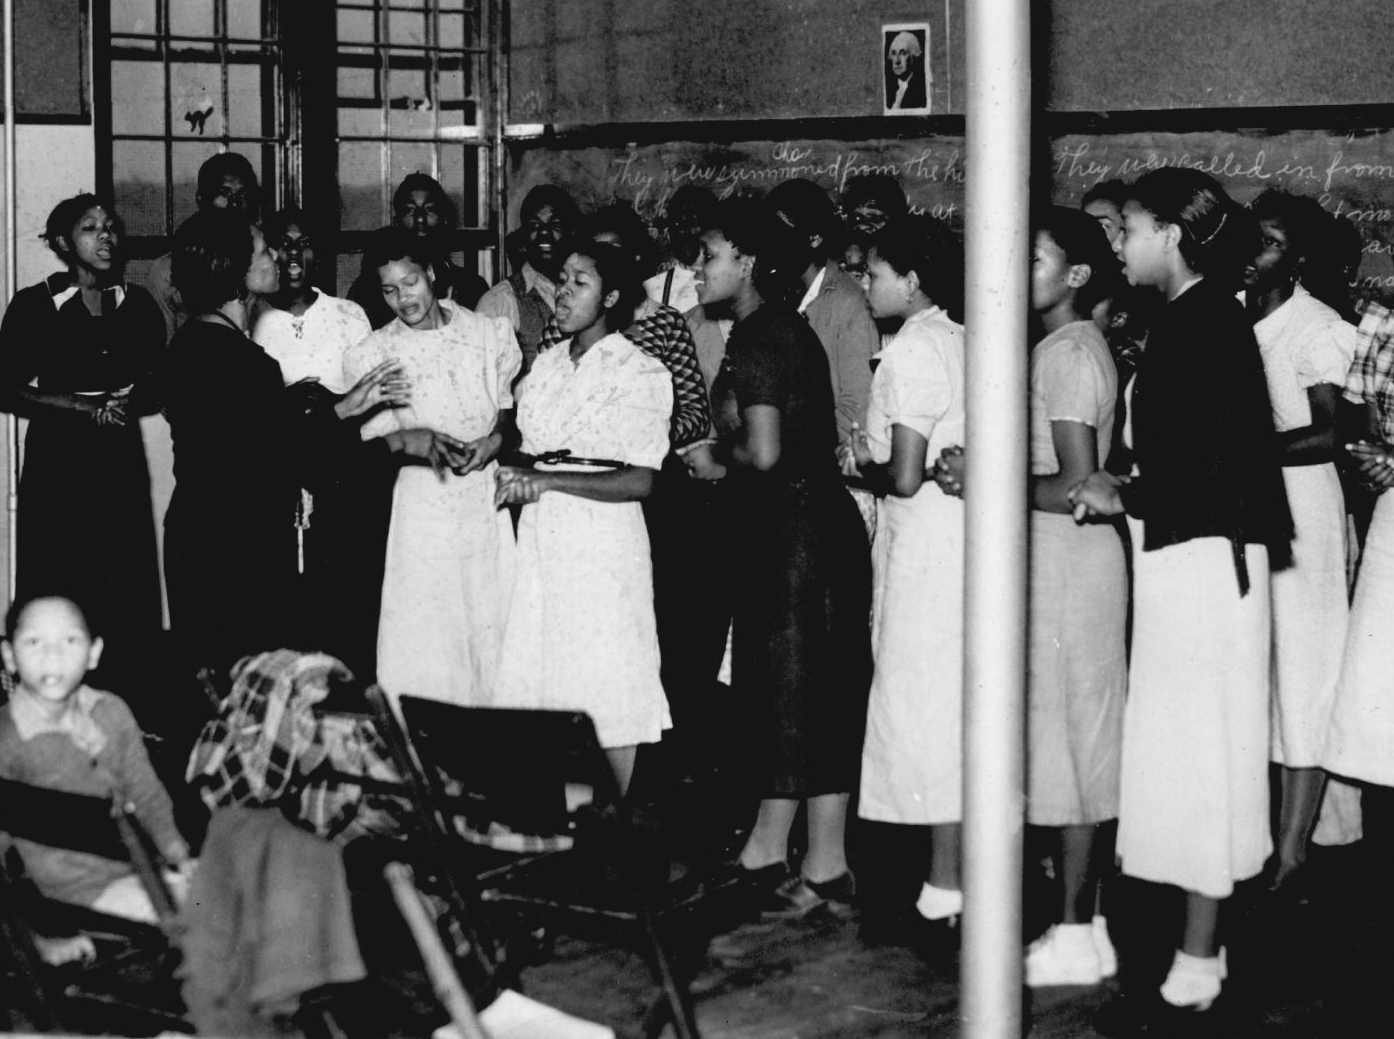 A group of young Black women sing while another woman stands in front of them conducting.